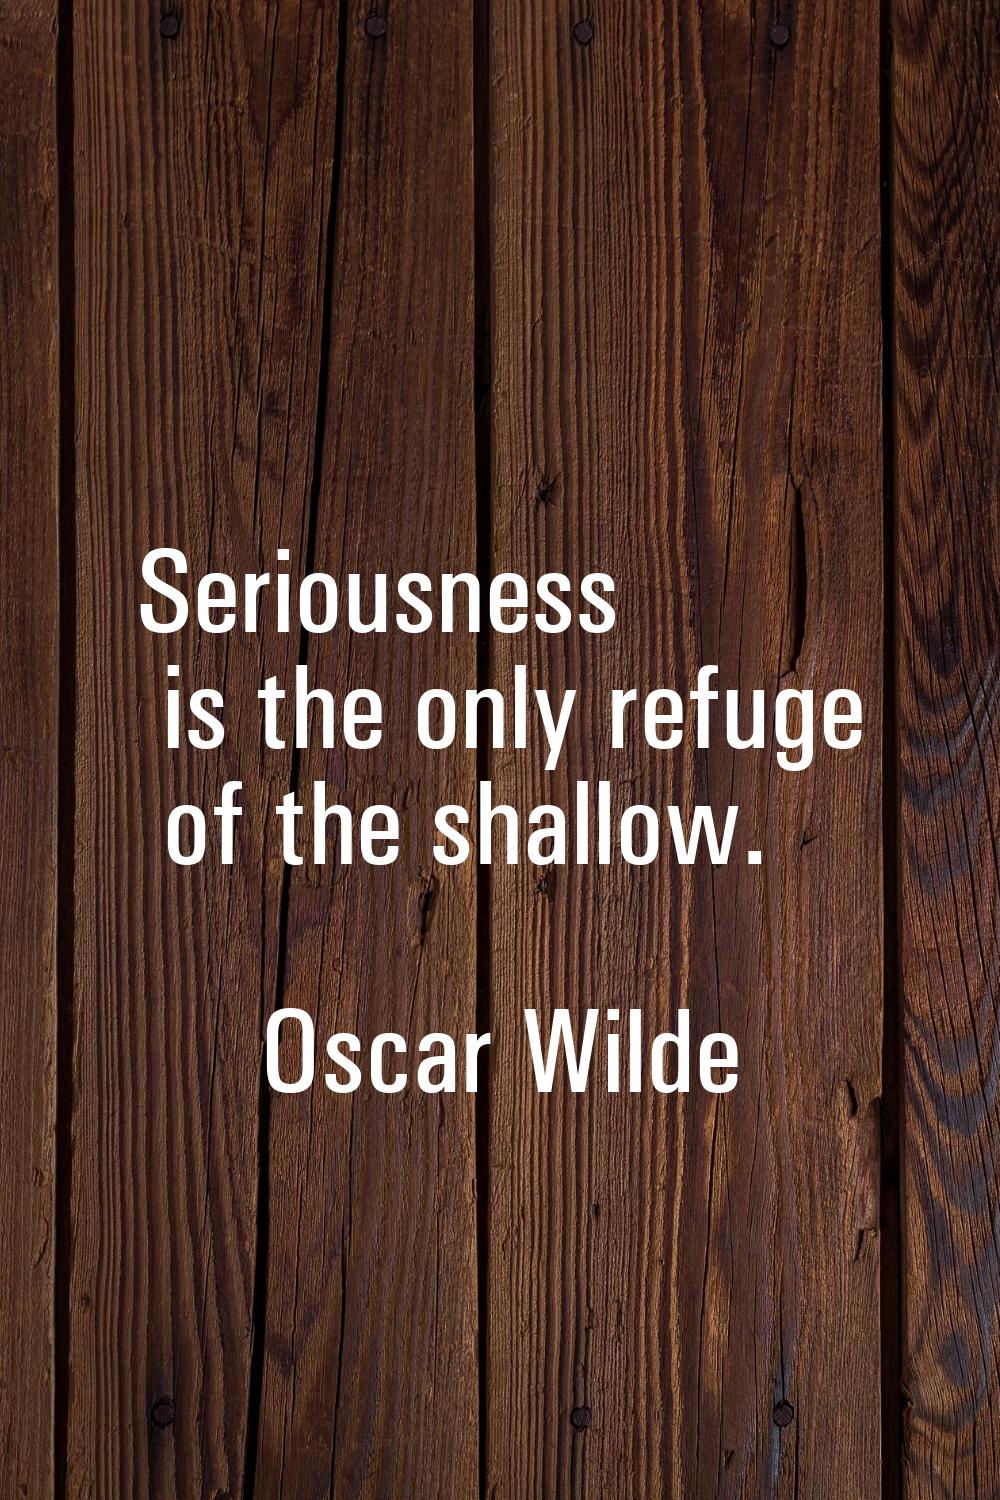 Seriousness is the only refuge of the shallow.